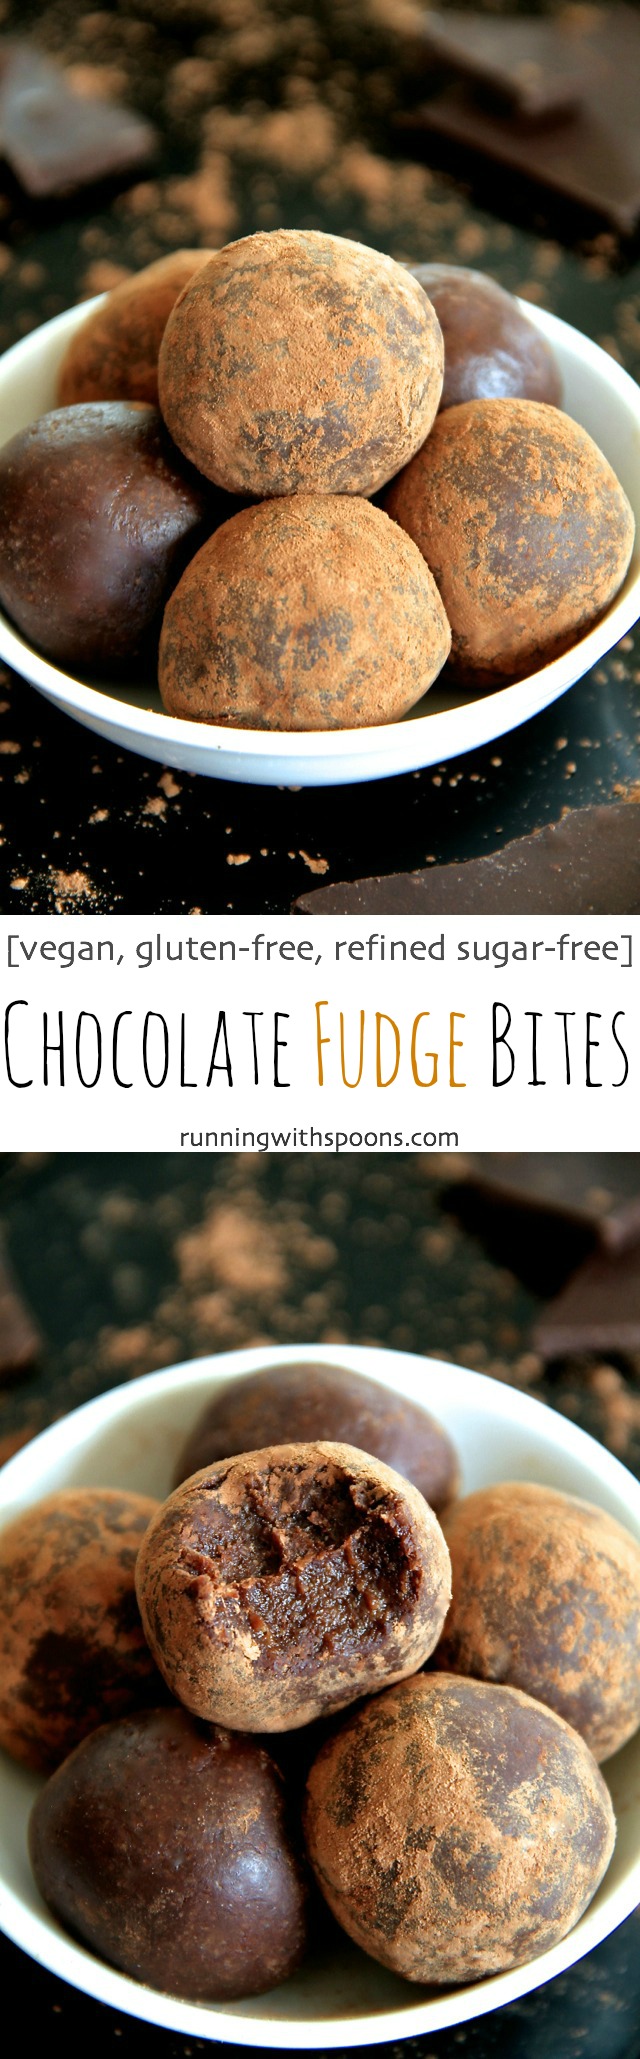 Chocolate Fudge Bites -- Soft, tender, and loaded with chocolate flavour, these melt-in-your-mouth bites taste ridiculously decadent while being made with good-for-you ingredients. Gluten-free, vegan, and customizable depending on your dietary needs, this is a healthy treat that everyone will love! || runningwithspoons.com